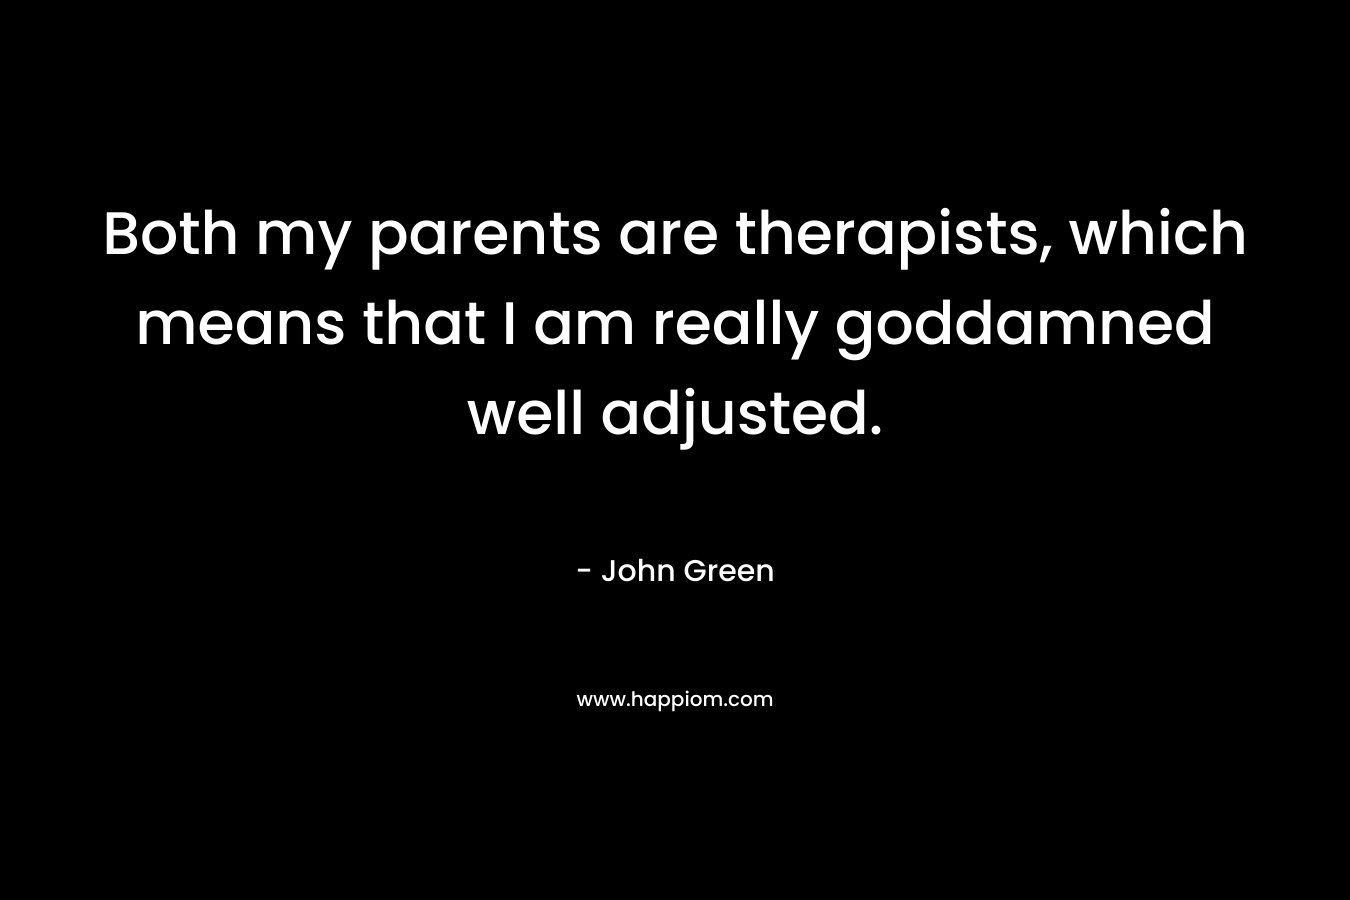 Both my parents are therapists, which means that I am really goddamned well adjusted.